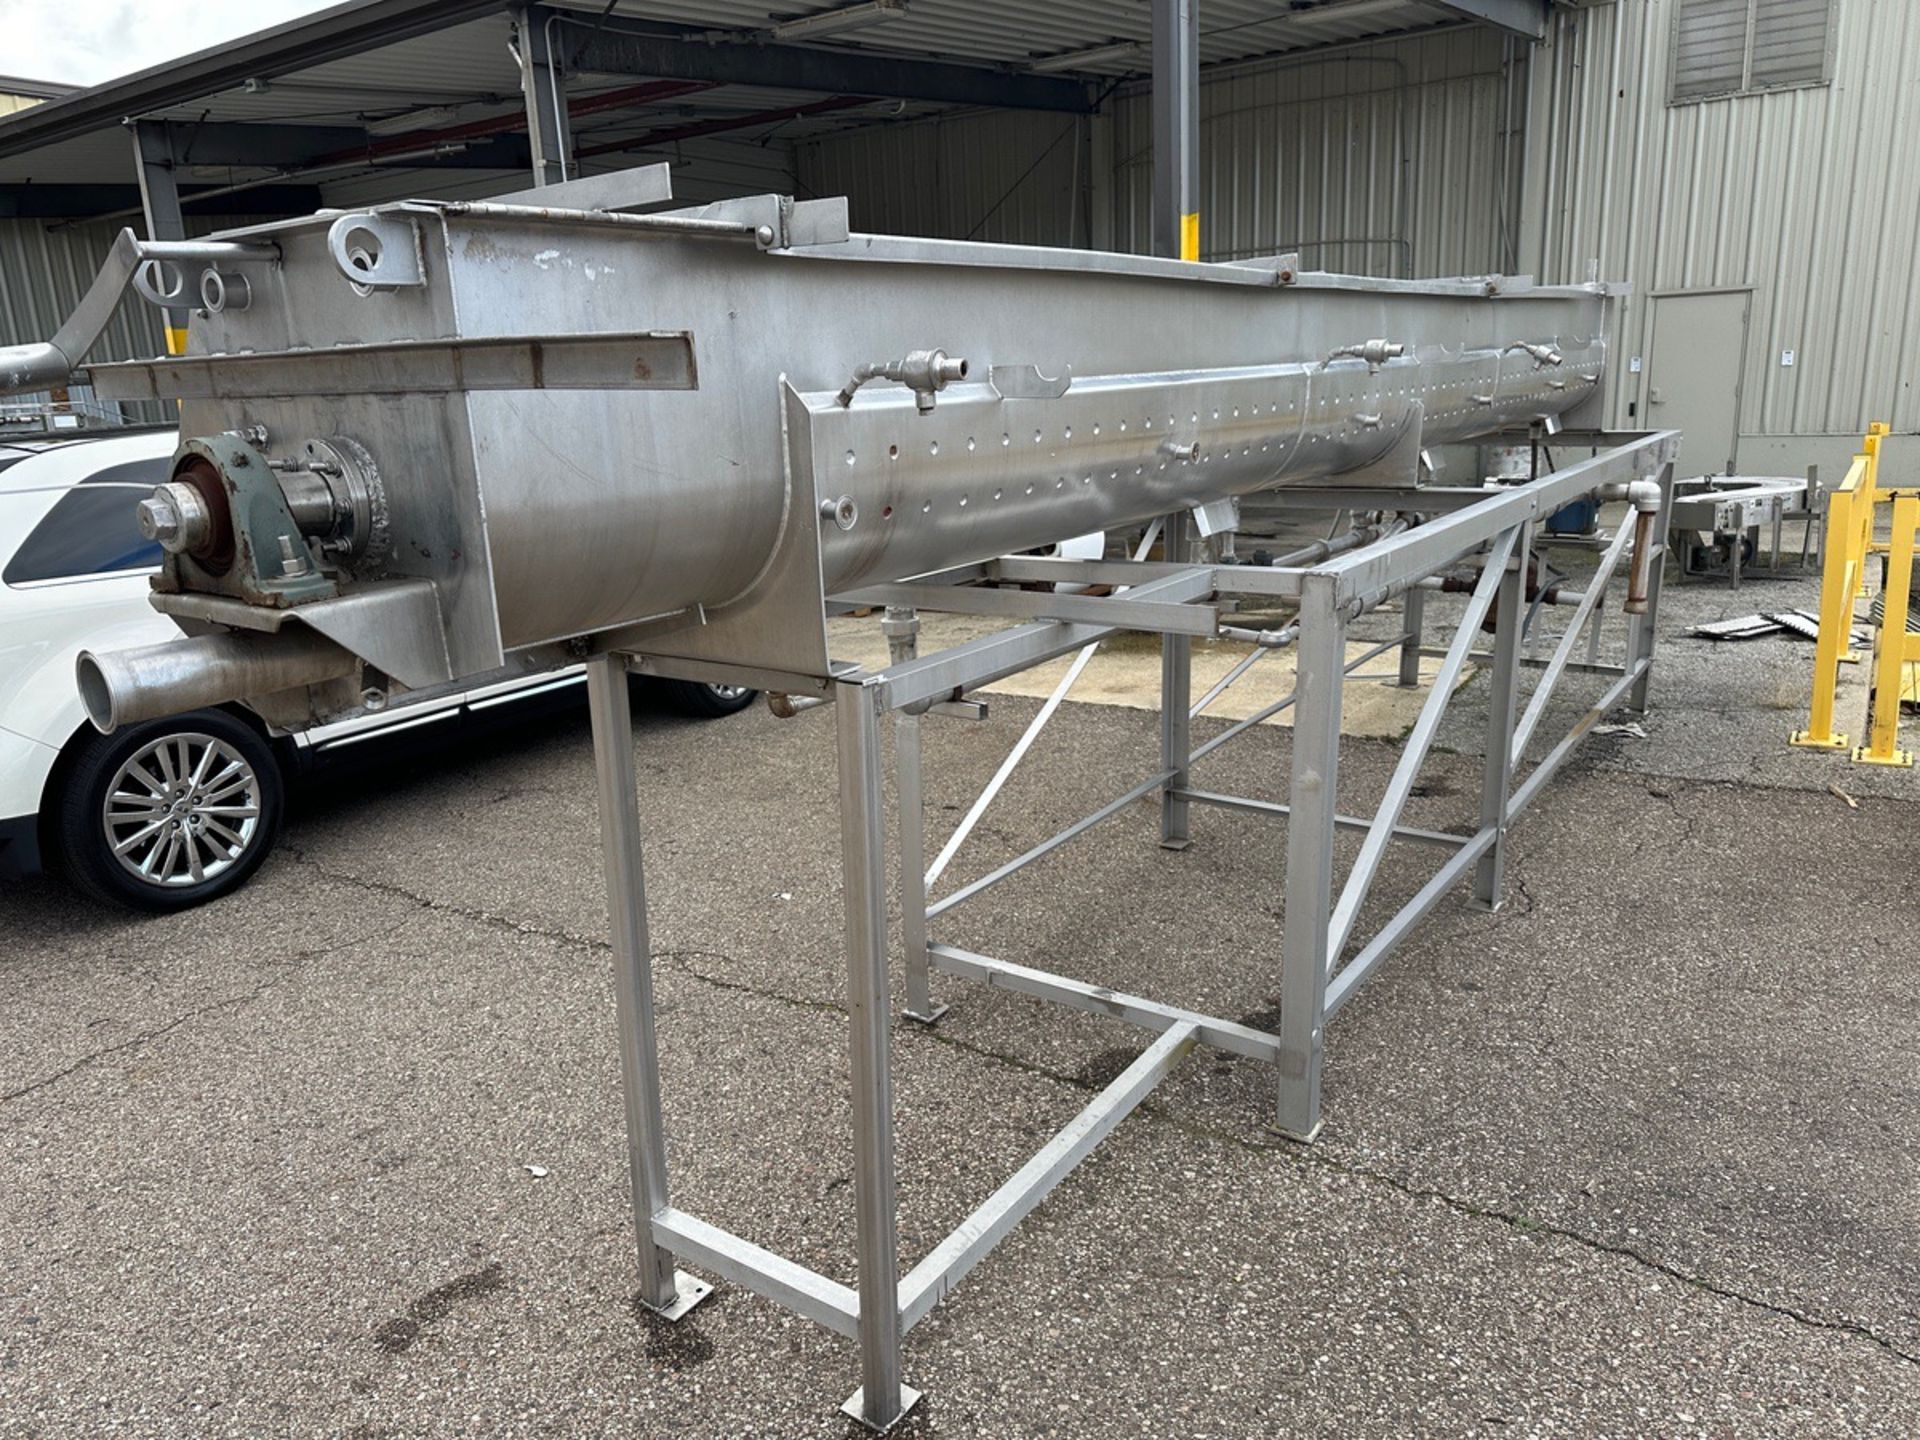 Rietz Stainless Steel Screw Auger Conveyor with Jacketed Trough - Model | Rig Fee $450 - Image 2 of 8